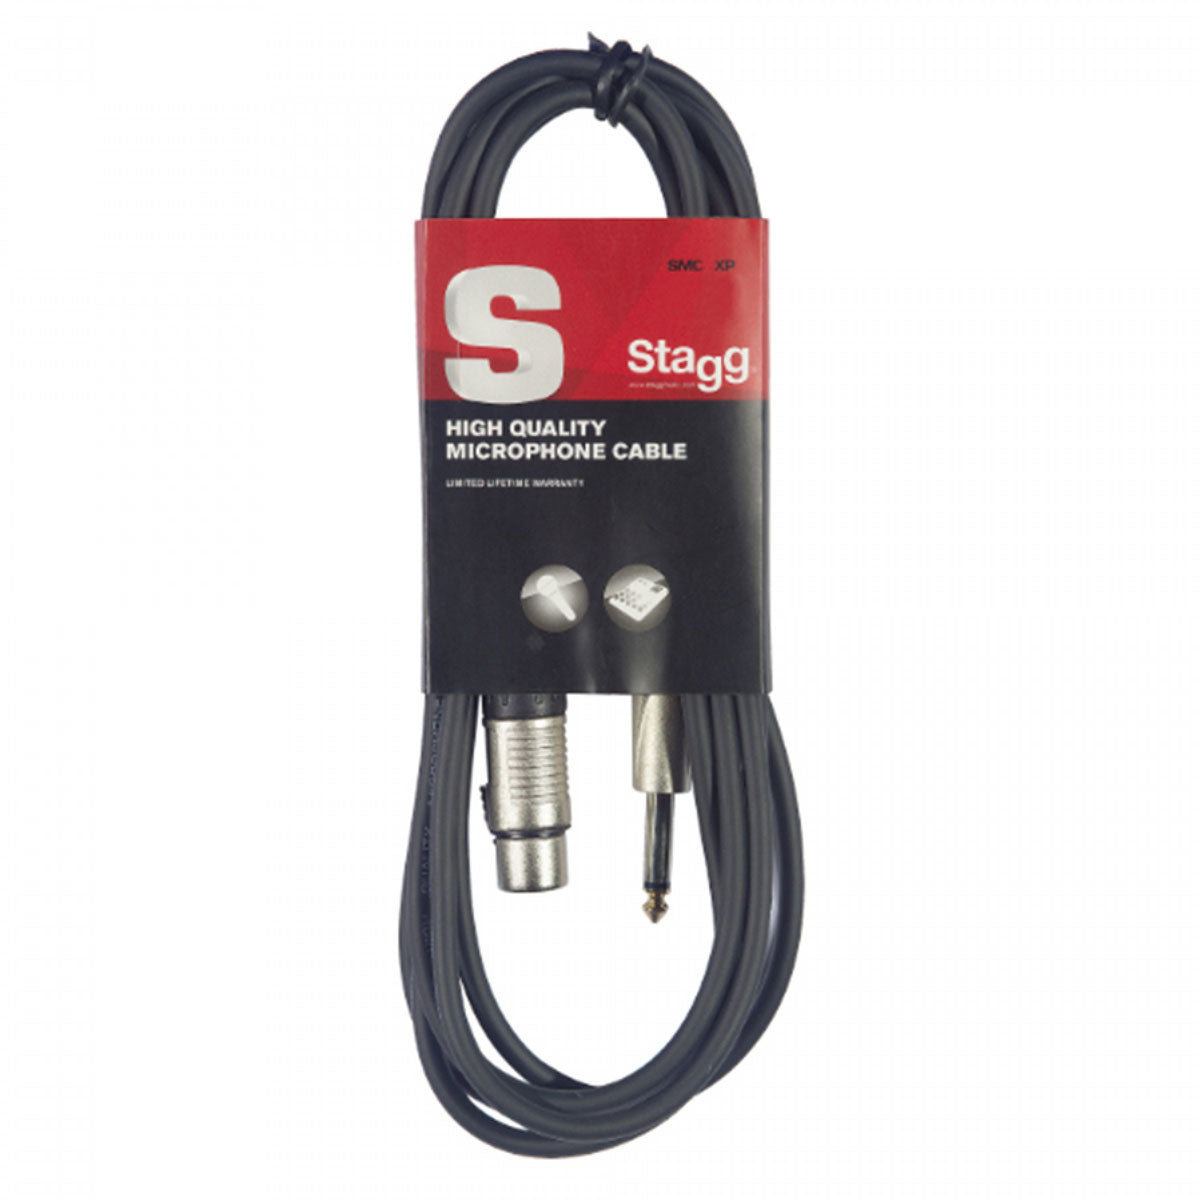 Stagg S-Series Microphone Cable - Female XLR To 1/4" Jack Plug